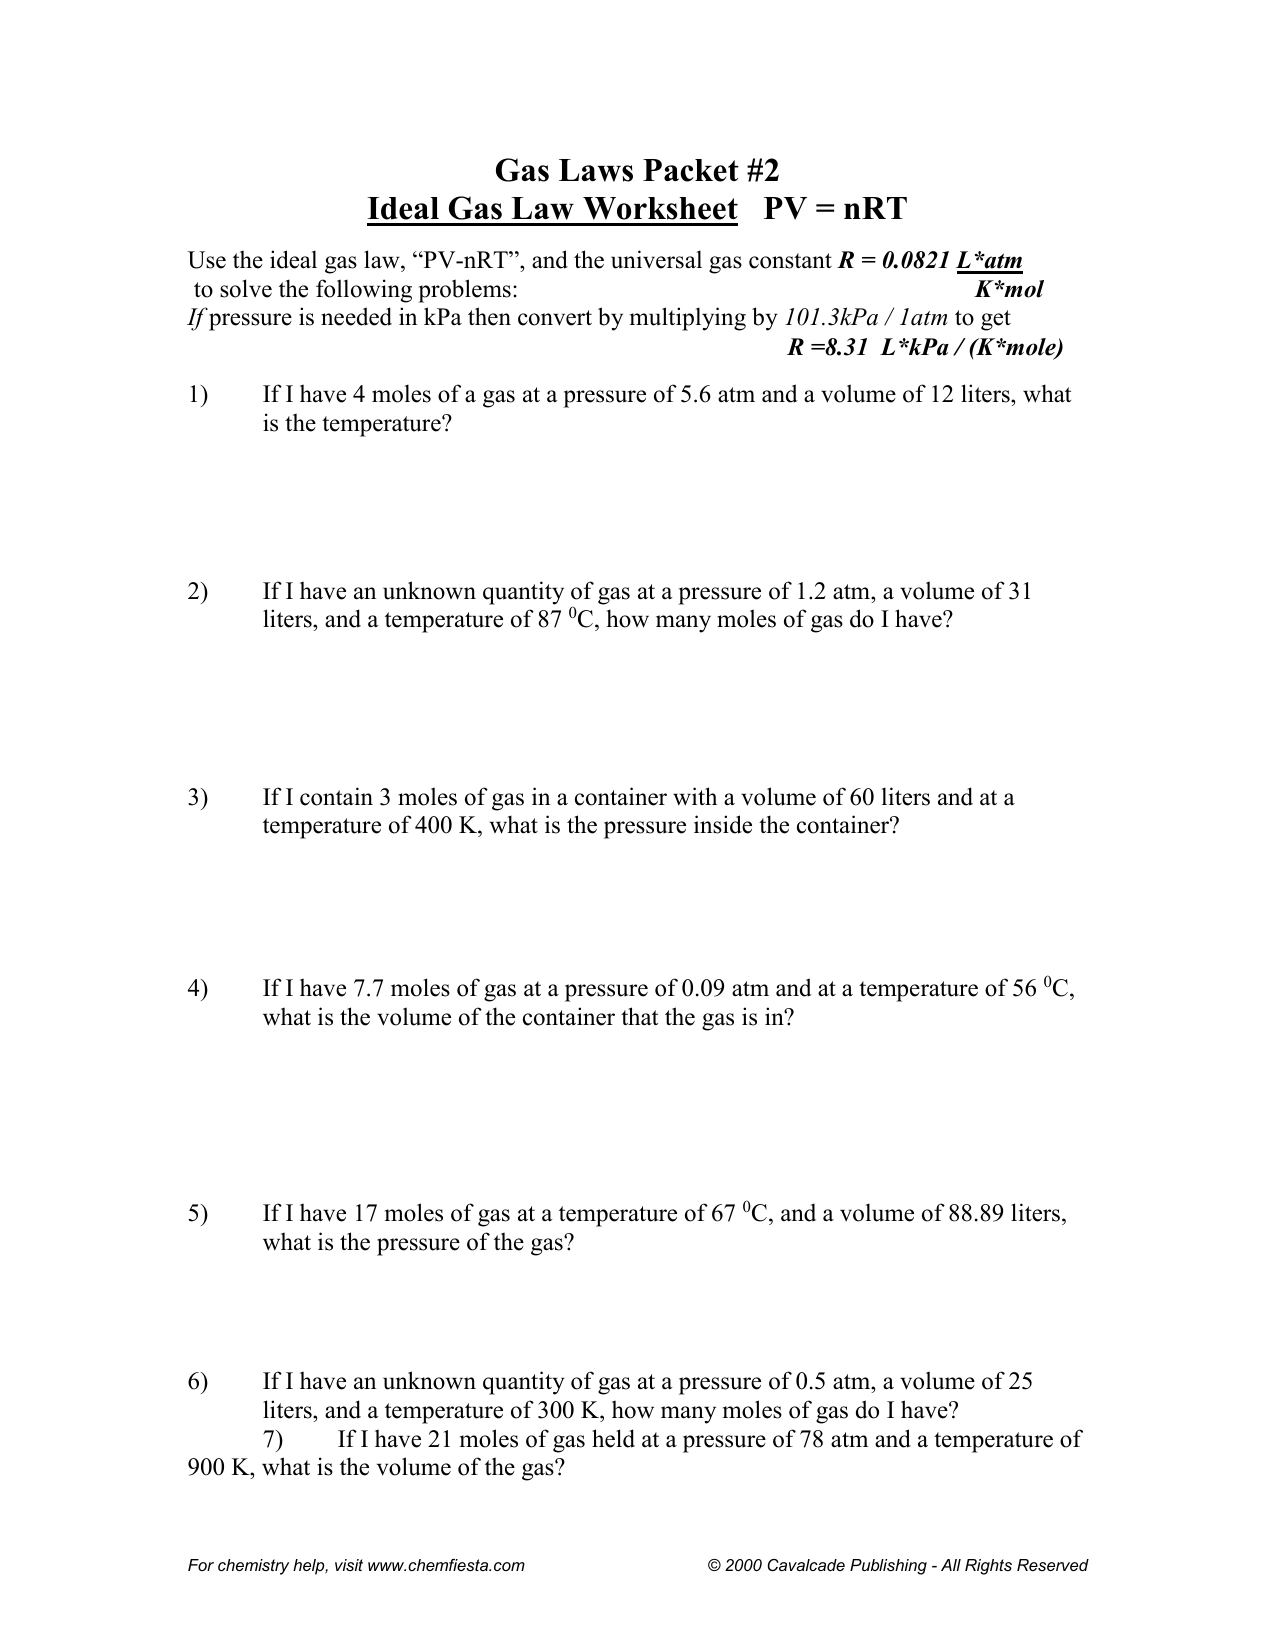 Ideal gas law Packet 21 worksheet With Ideal Gas Laws Worksheet